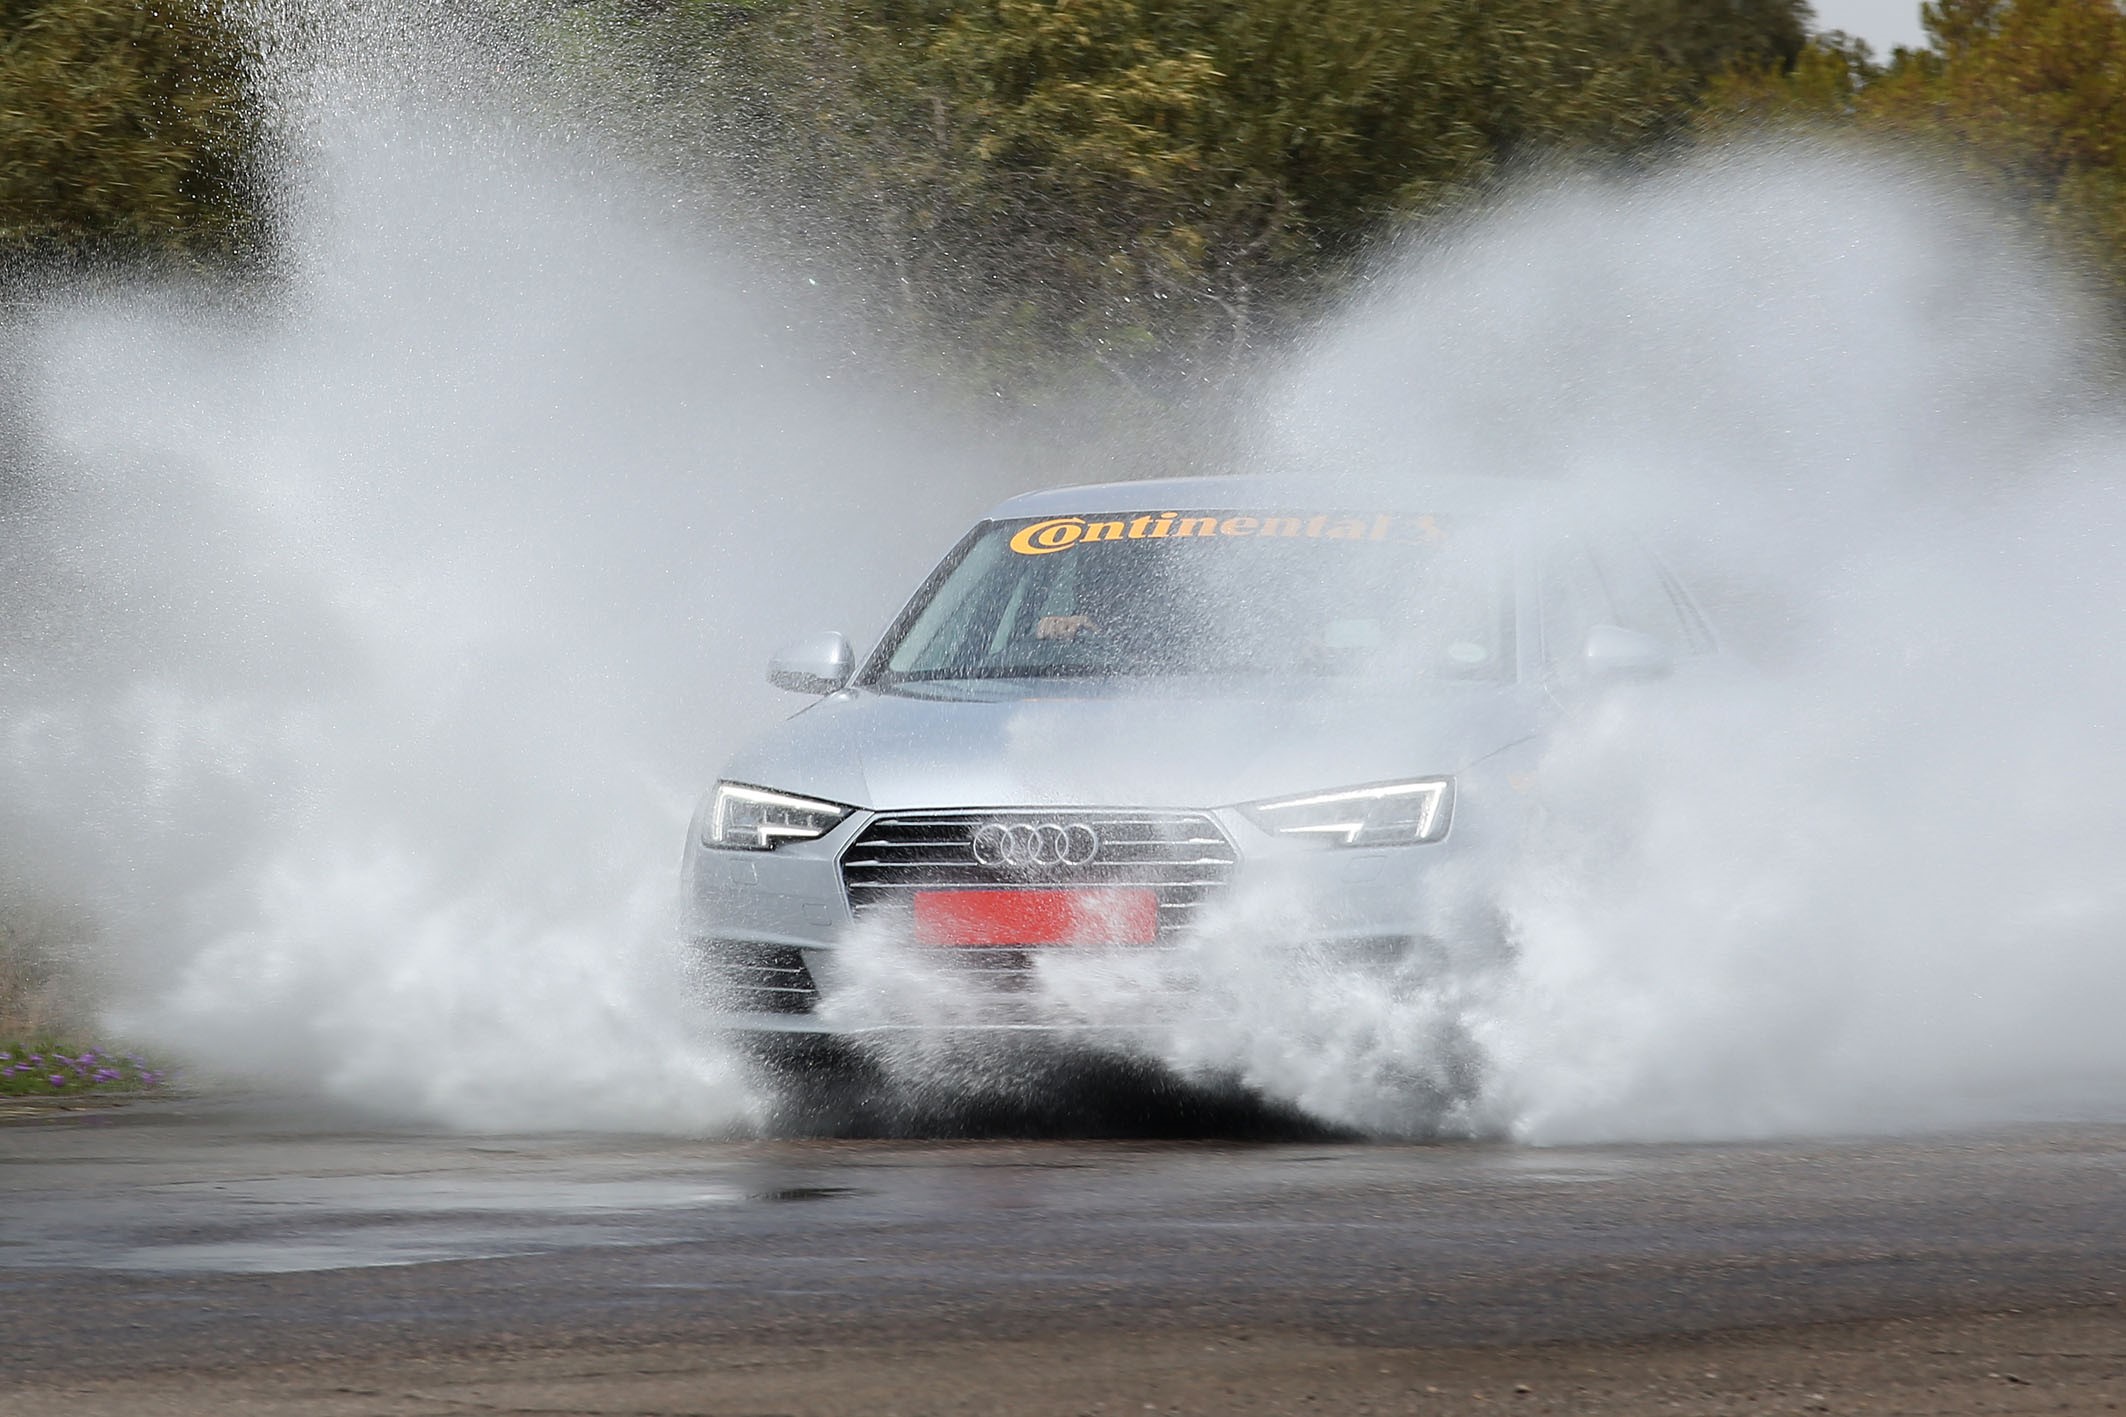 Photo by Inga Terblanche A car with worn tyres driving through the water during a demonstration of aquaplaning at the Automobile Association’s (AA) car tyre safety demonstration at the Gerotek Test Facilities. 